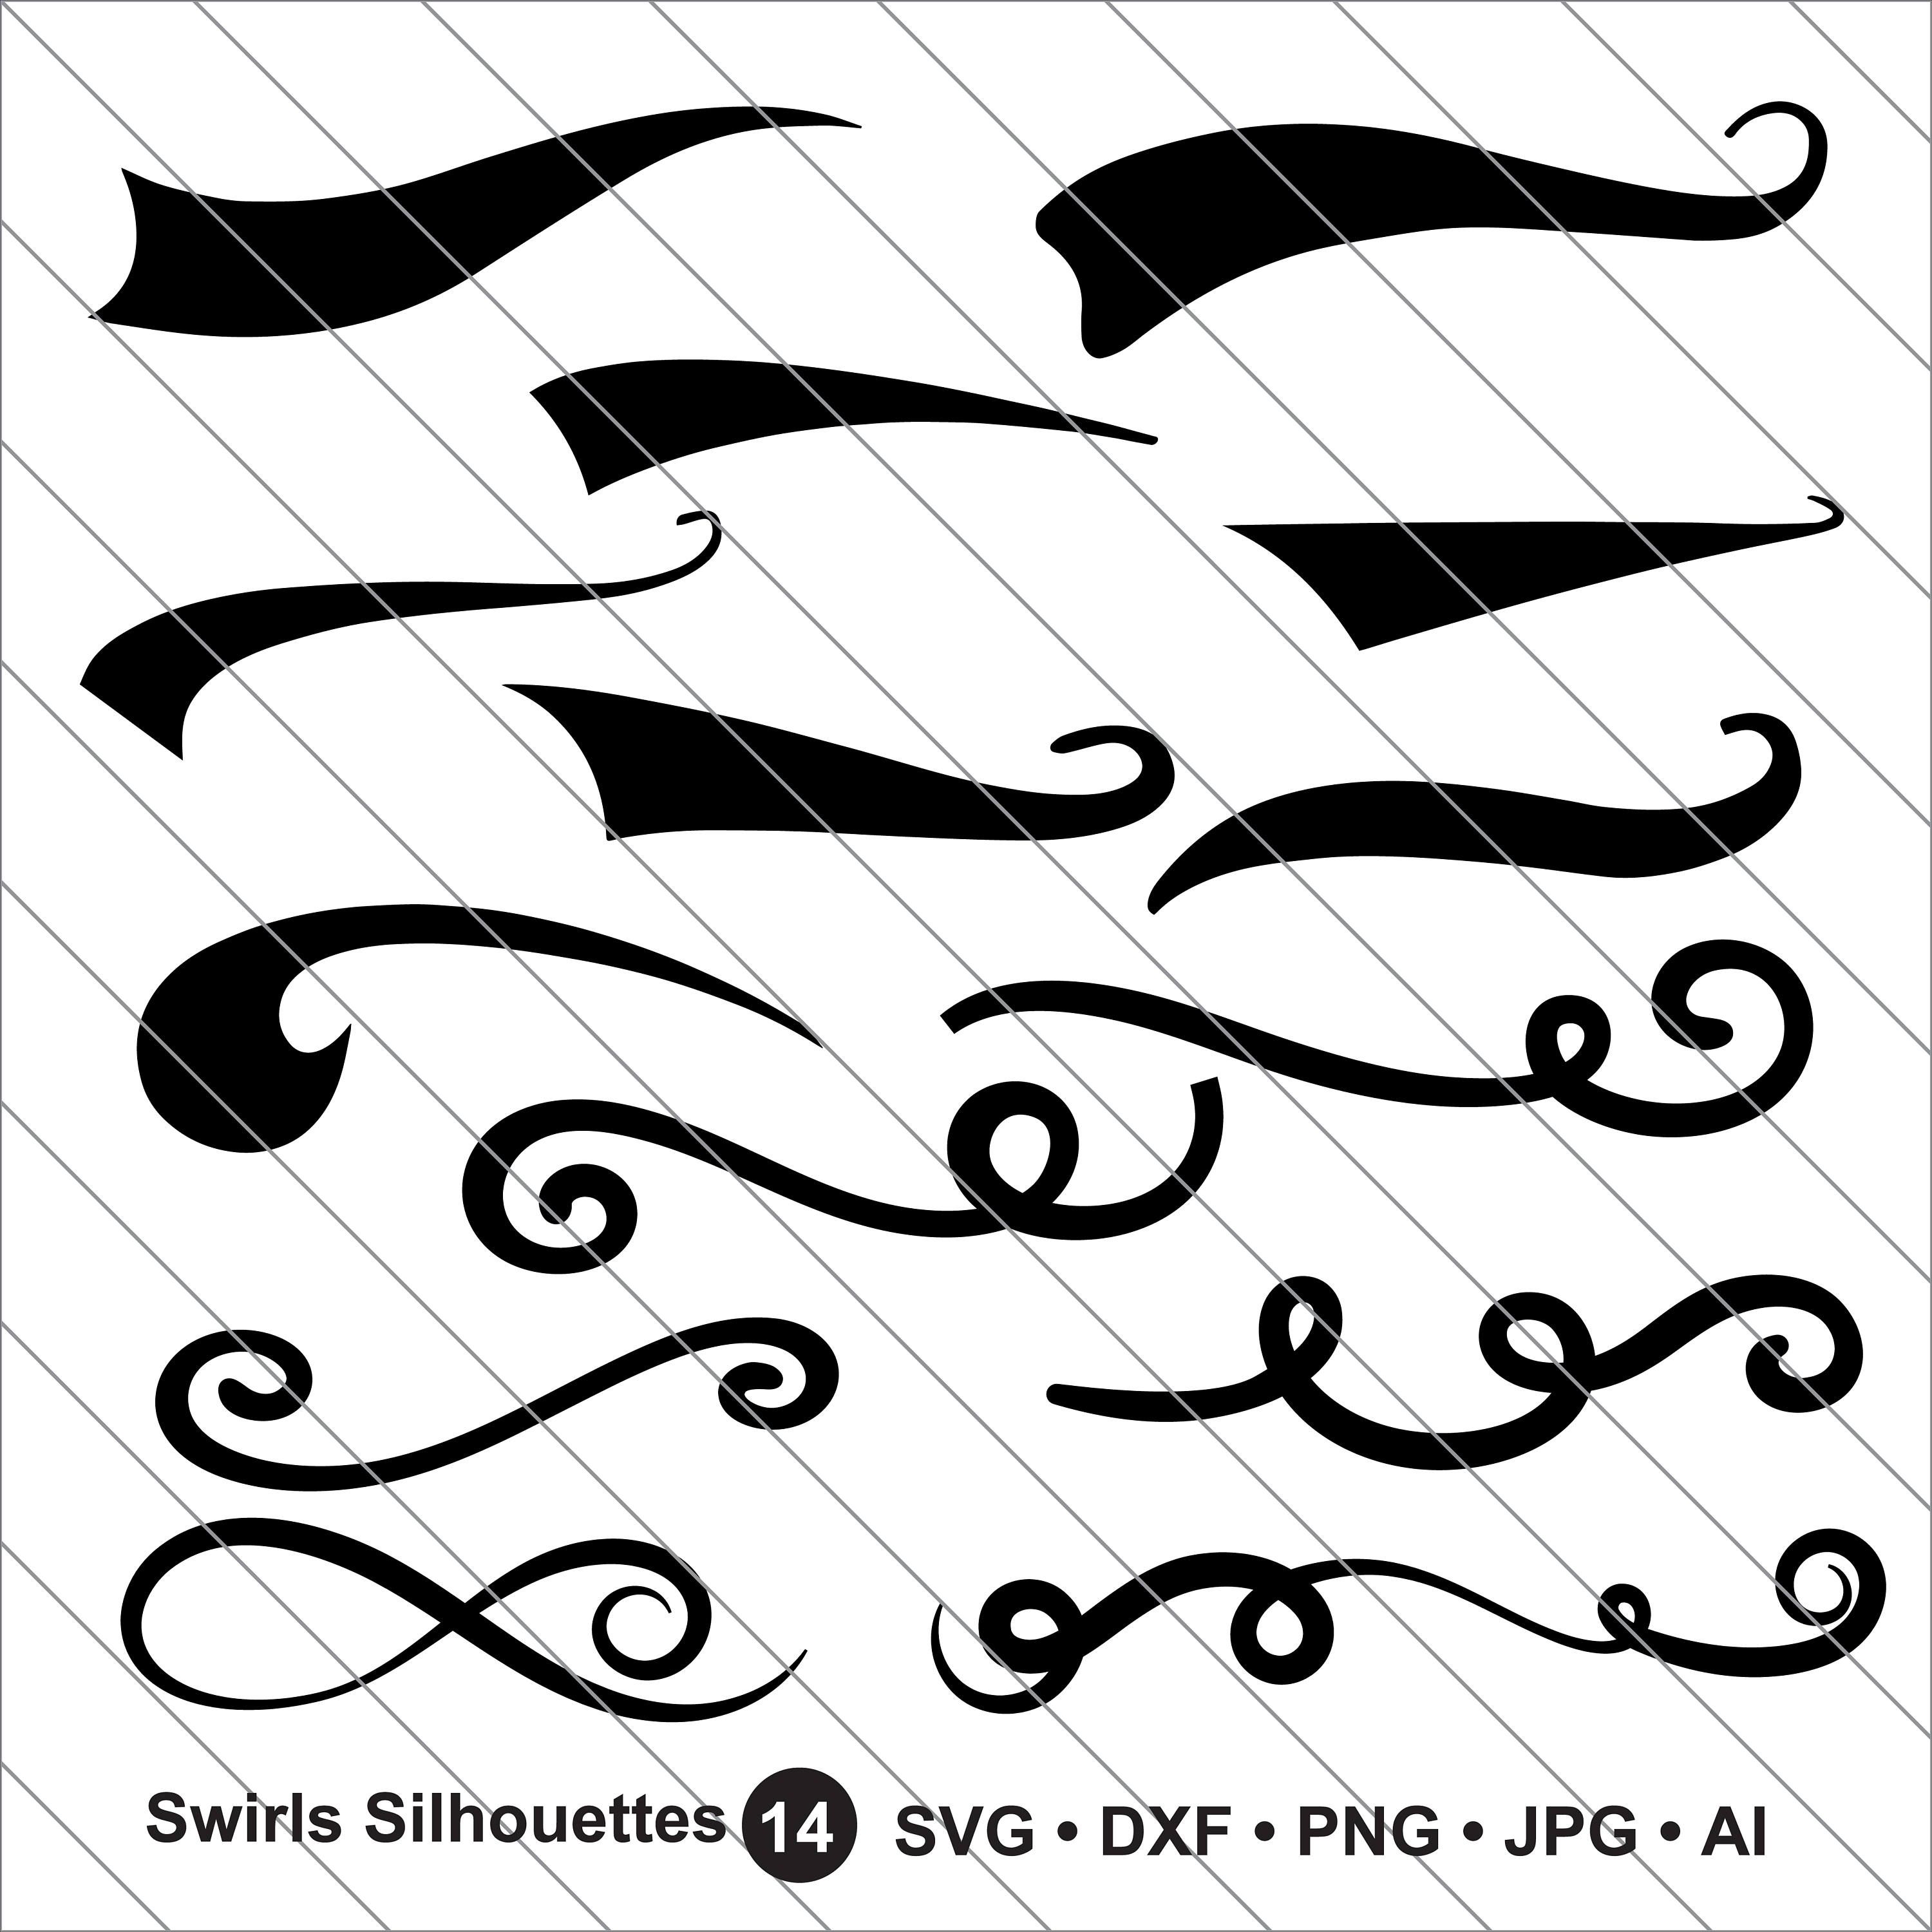 Download Swirl clipart file, Swirl file Transparent FREE for ...